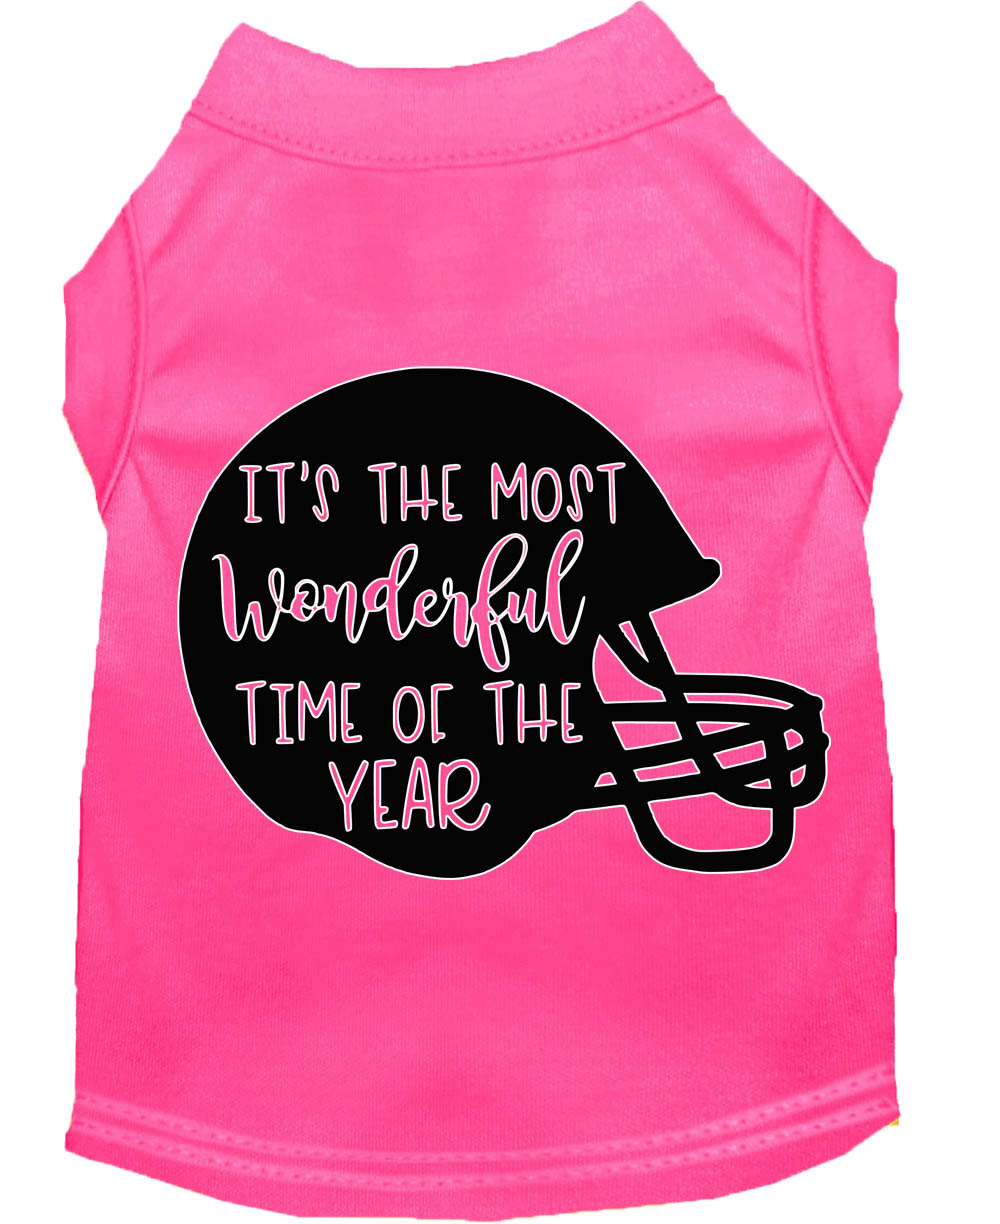 Most Wonderful Time of the Year (Football) Screen Print Dog Shirt Bright Pink Med